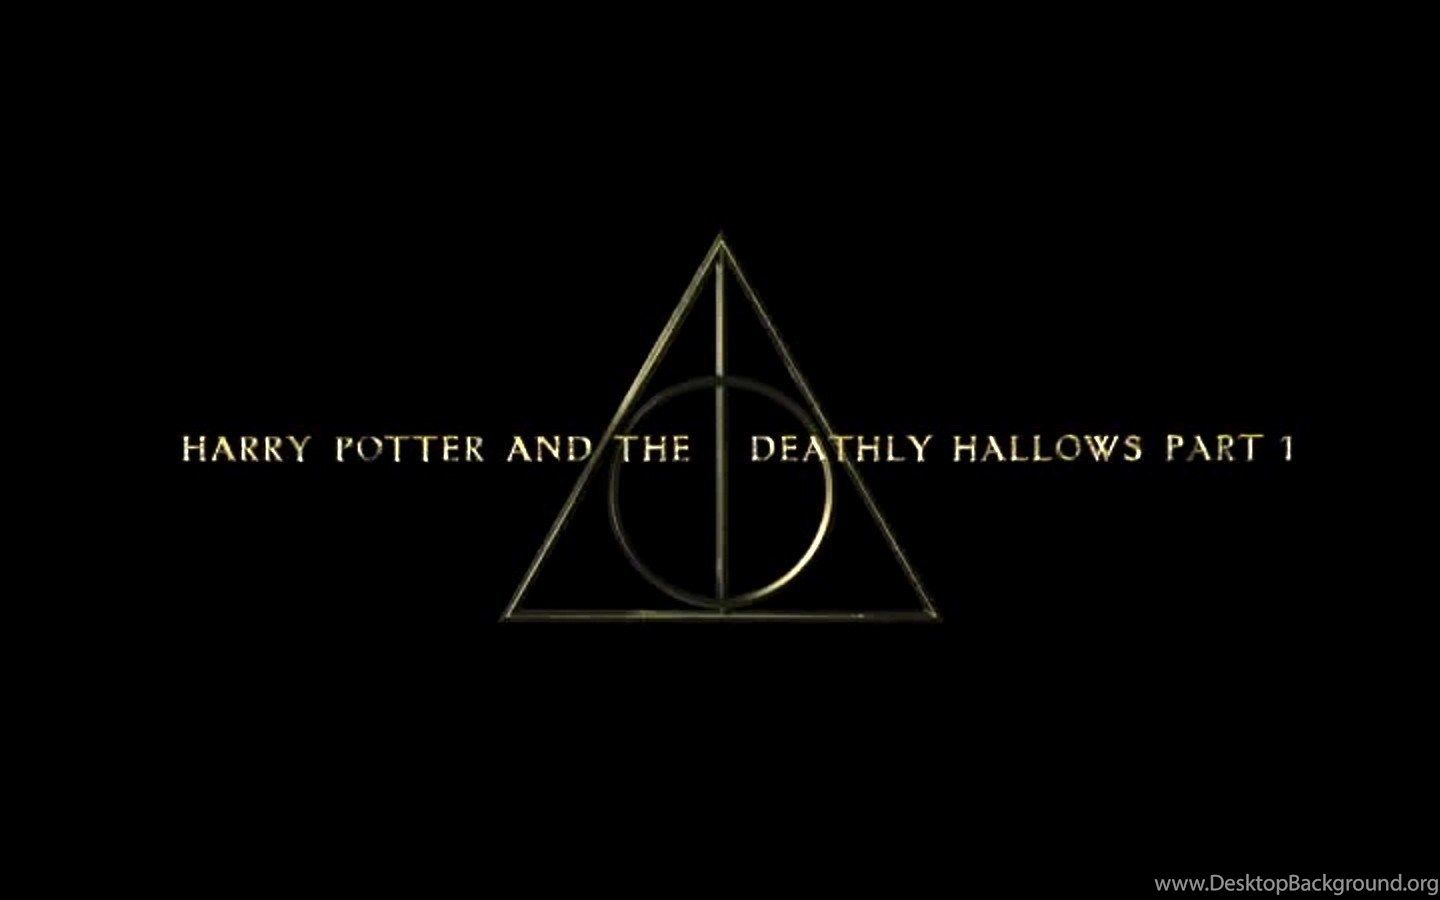 Harry Potter Harry Potter And The Deathly Hallows Wallpaper. Desktop Background